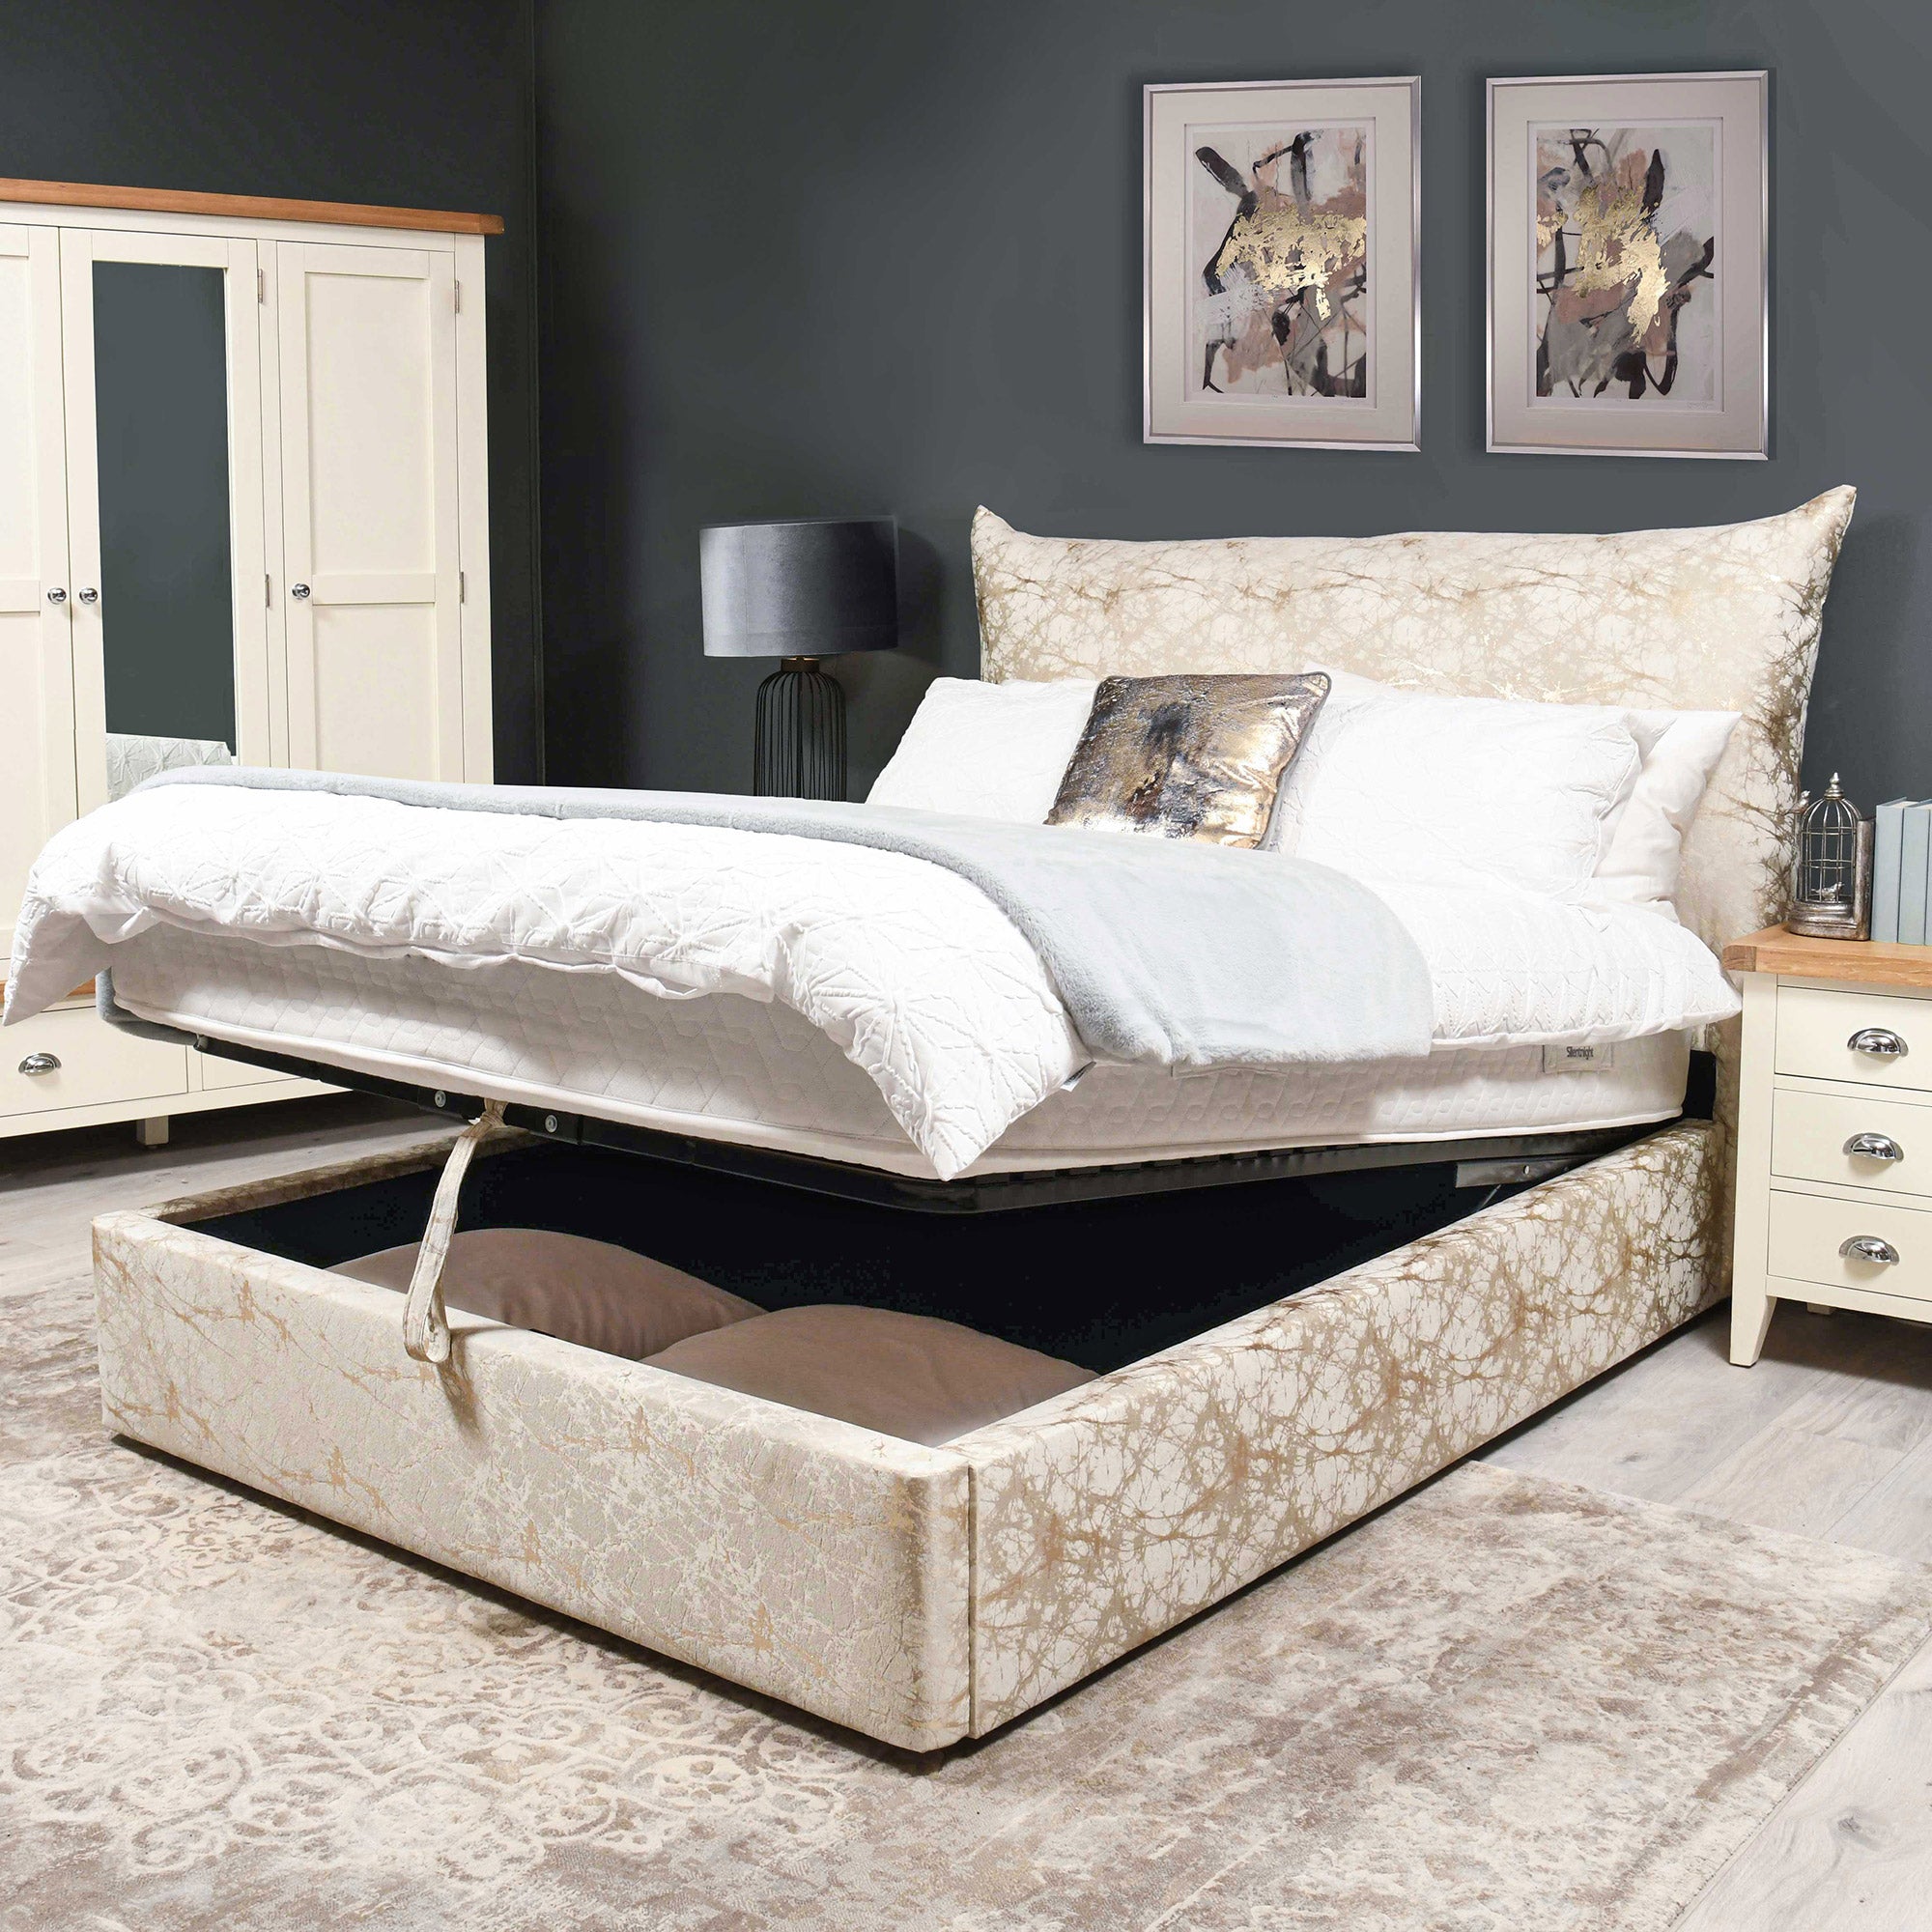 Romeo - Bed Frame Ottoman Double (135cm) In Standard Fabric